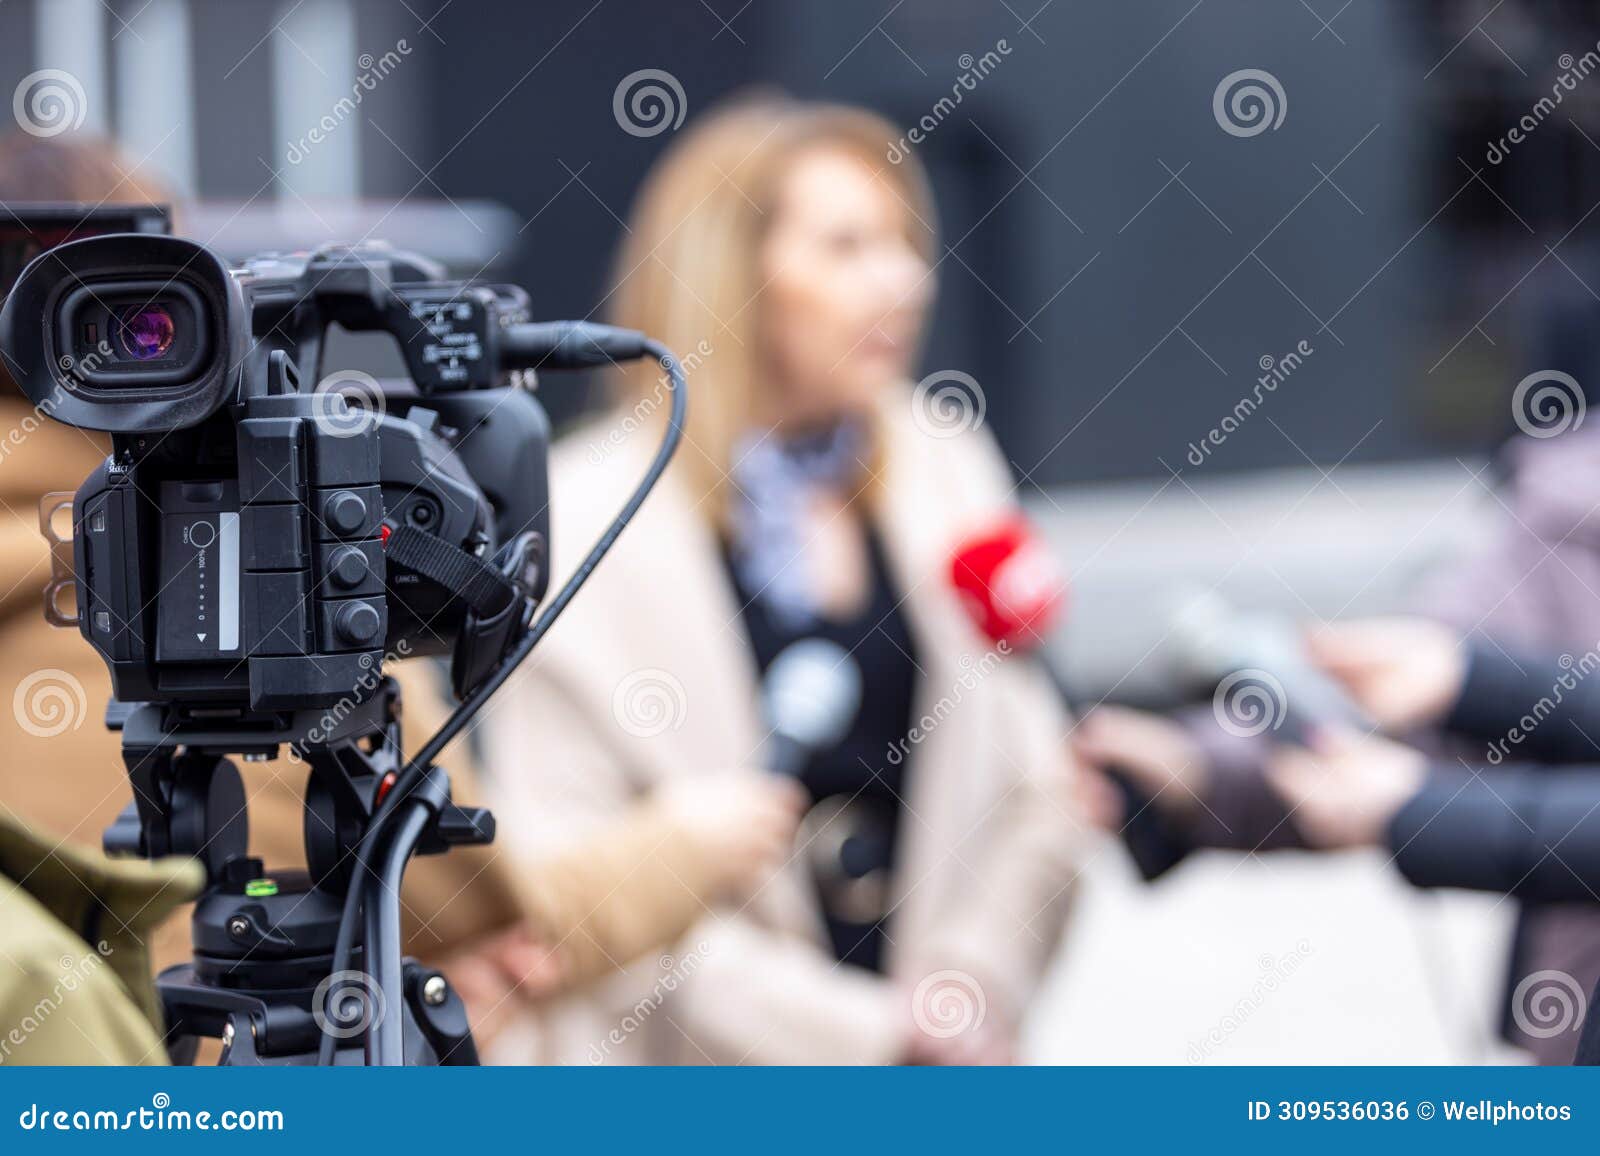 tv or media interview. public relations - pr. news conference.